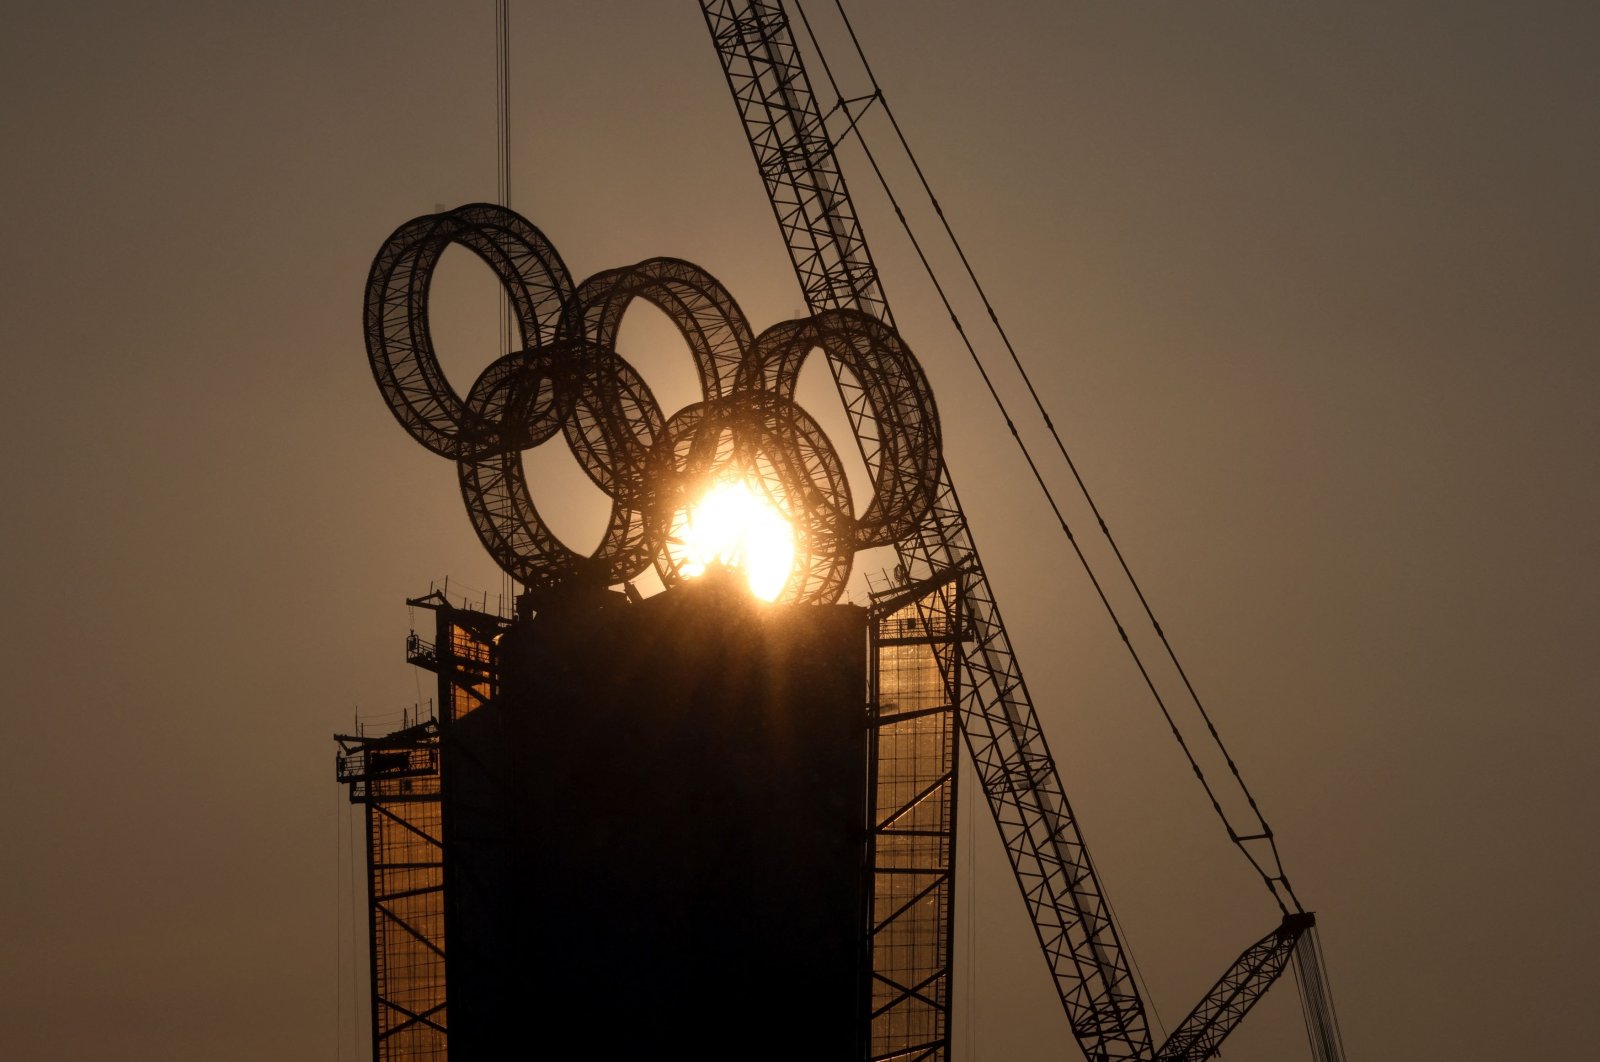 The sun sets behind the Olympic Rings atop a tower near the Yanqing cluster of Beijing 2022 Winter Olympics, in Beijing, China, January 19, 2022. REUTERS/Thomas Peter